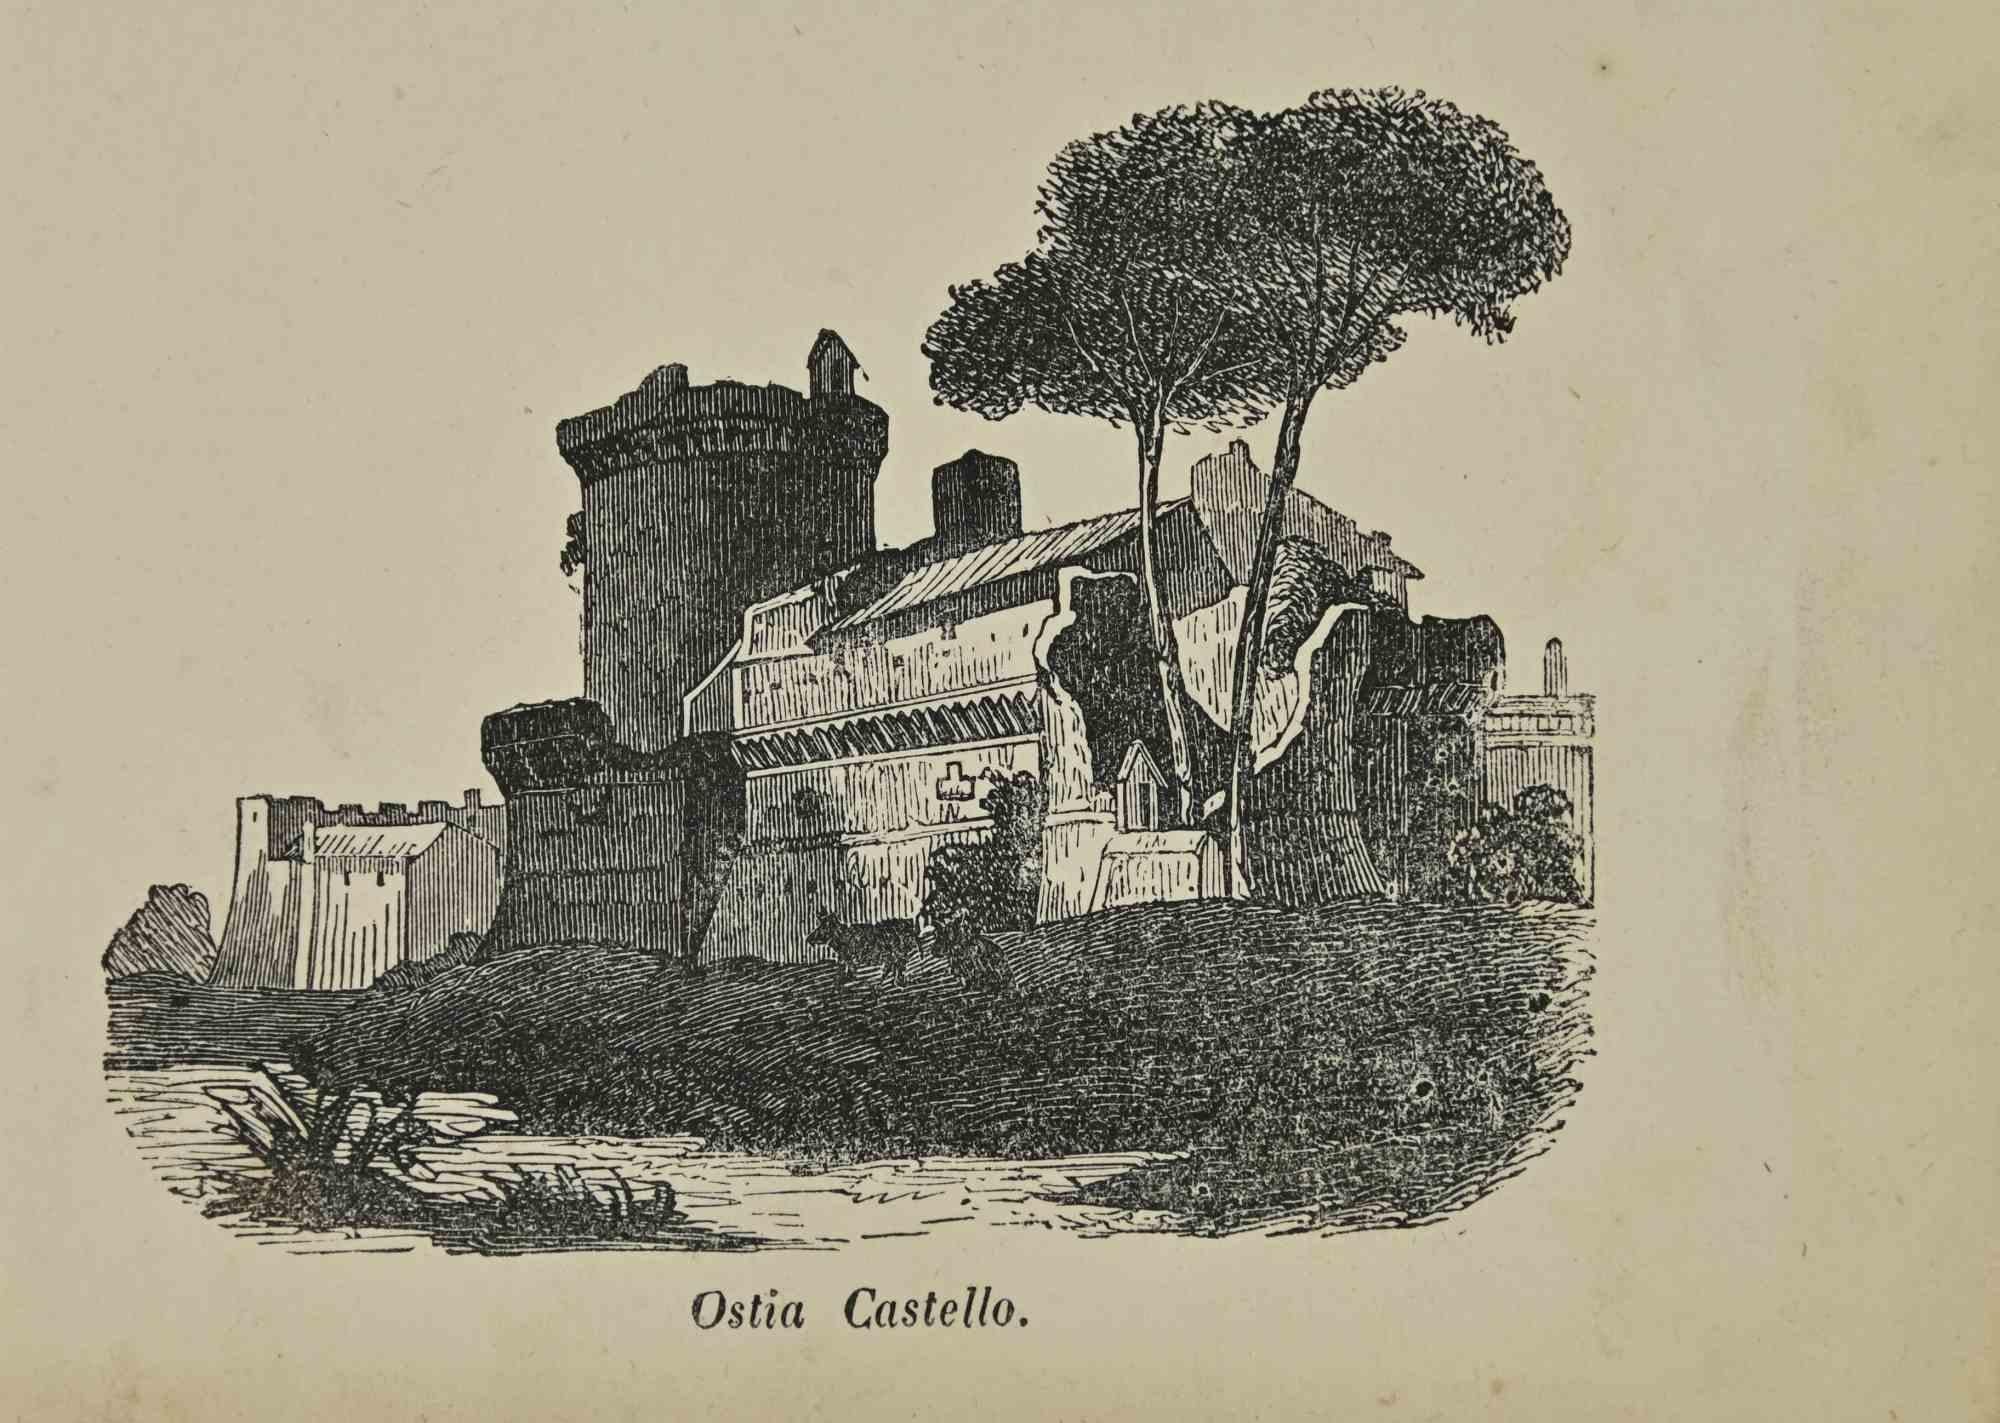 Uses and Customs - Ostia Castle - Lithograph - 1862